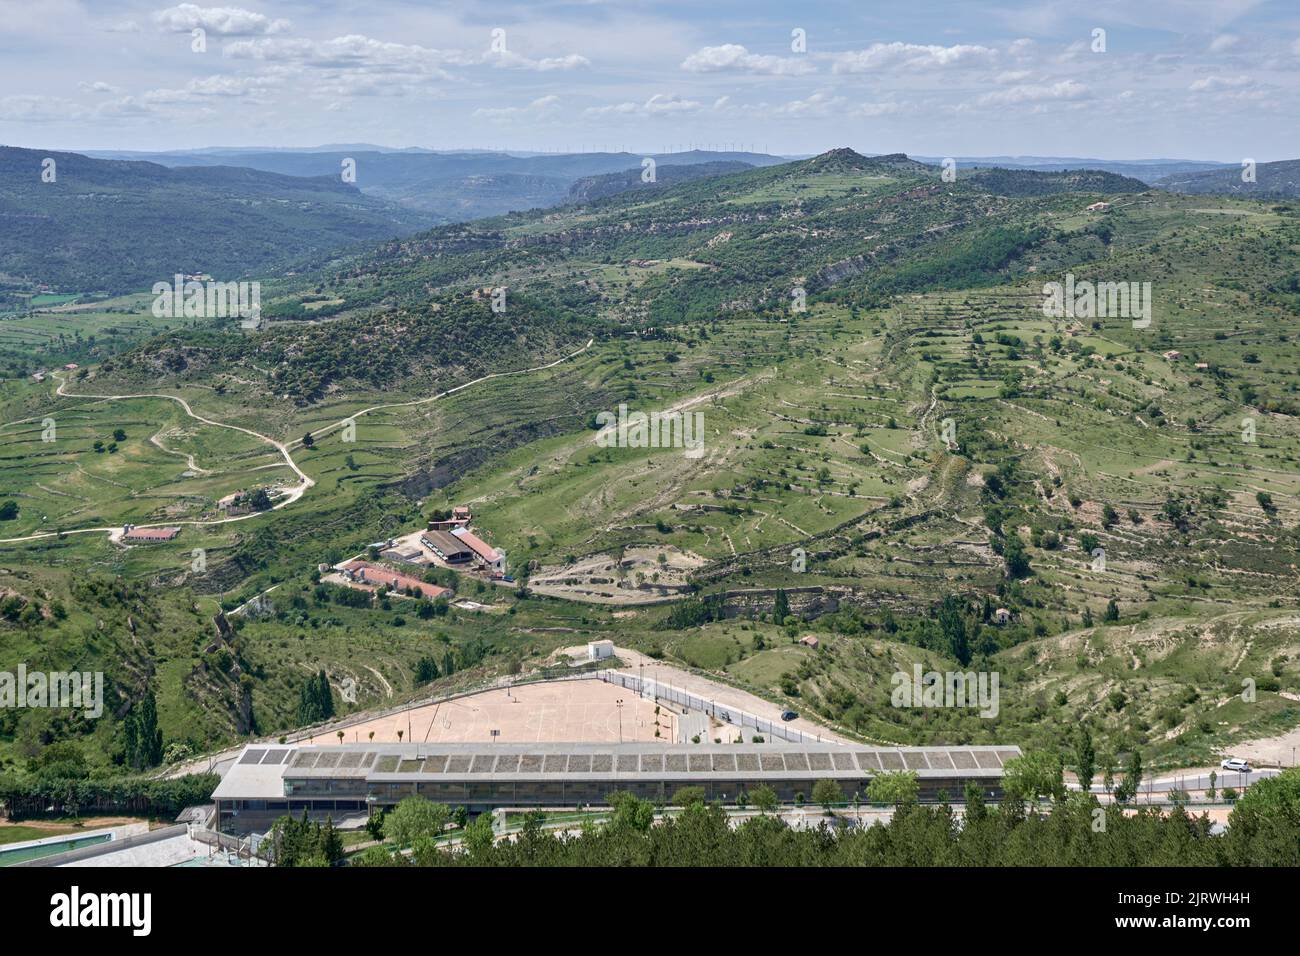 aerial view of the soccer field on the Morella mountain with a line of horizontal axis wind turbines on the horizon line, Castellon, Spain, Europe Stock Photo